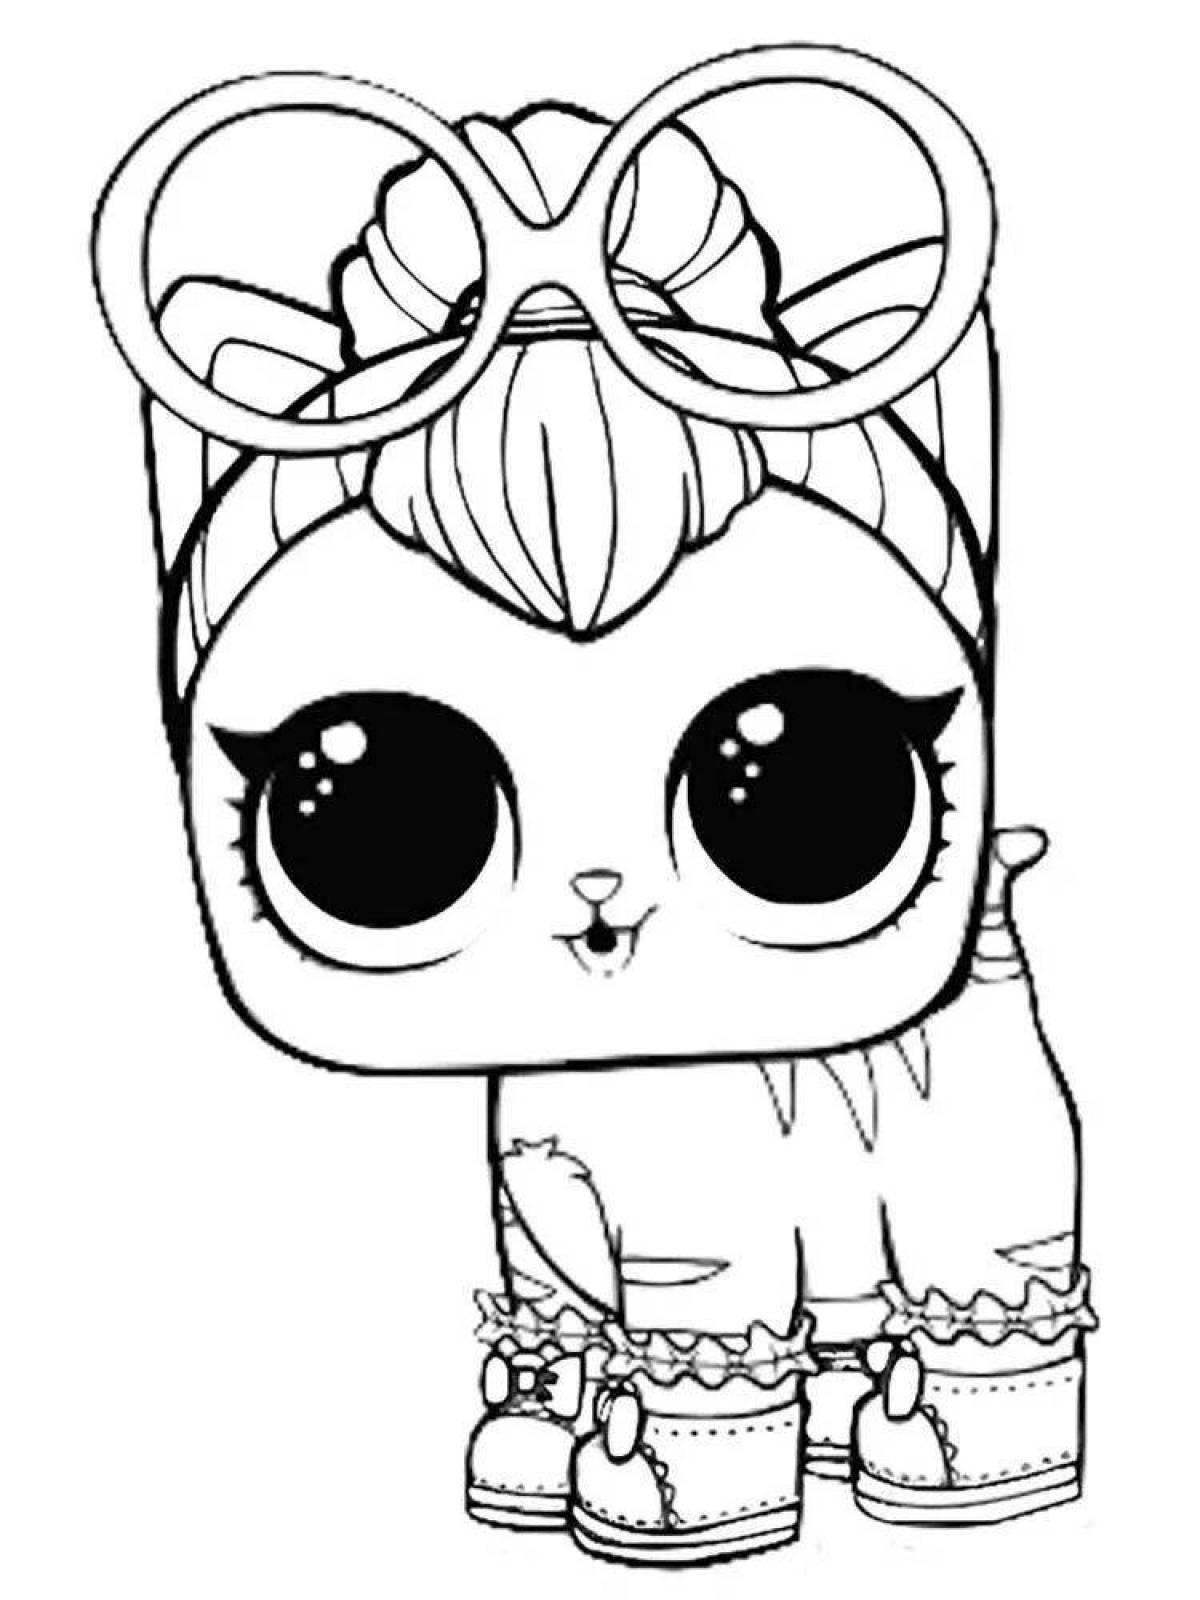 Coloring page adorable lolo pets